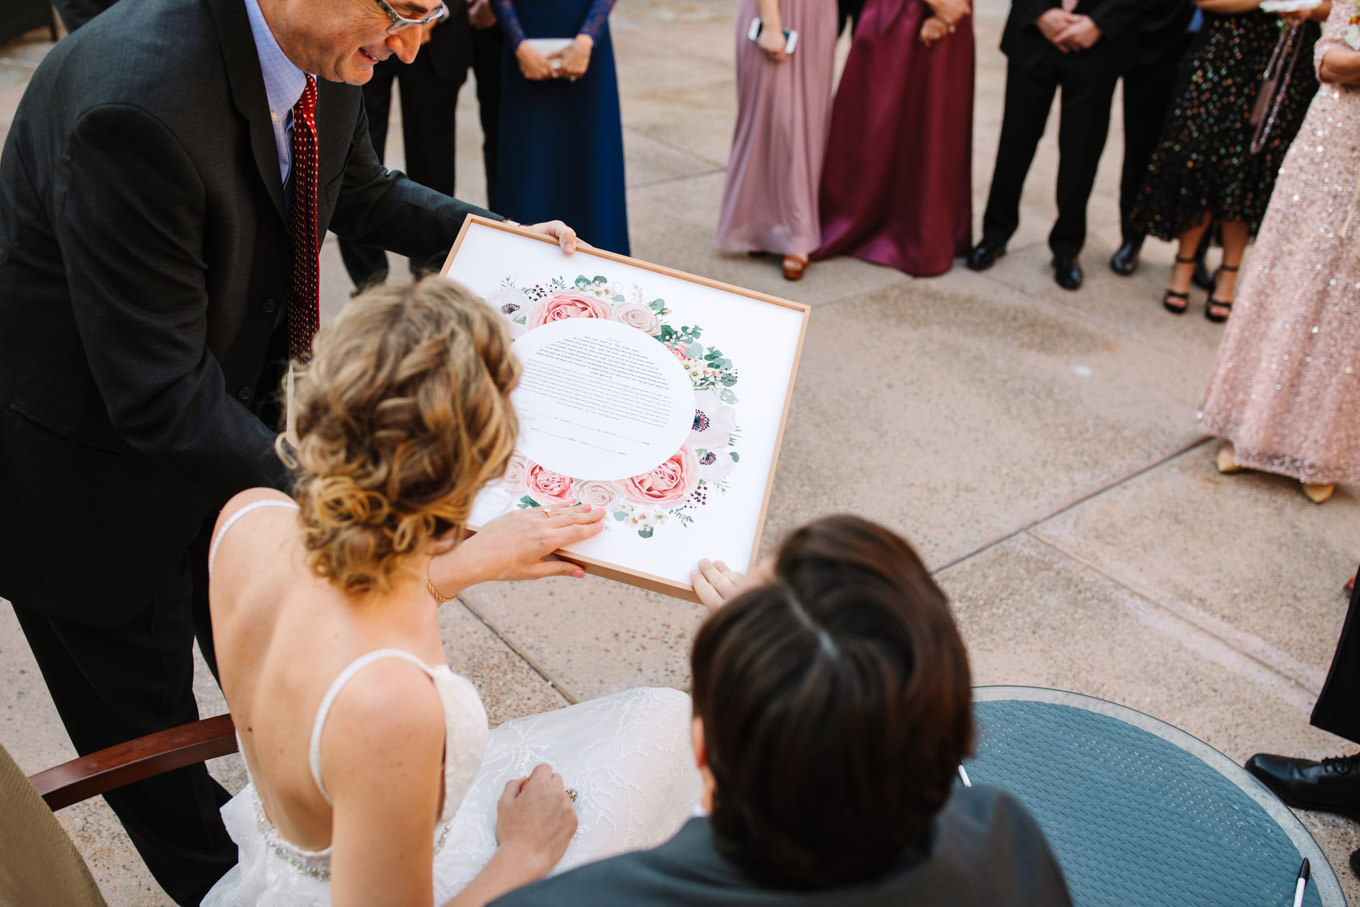 Ketubah signing | Living Desert Zoo & Gardens wedding with unique details | Elevated and colorful wedding photography for fun-loving couples in Southern California |  #PalmSprings #palmspringsphotographer #gardenwedding #palmspringswedding  Source: Mary Costa Photography | Los Angeles wedding photographer 